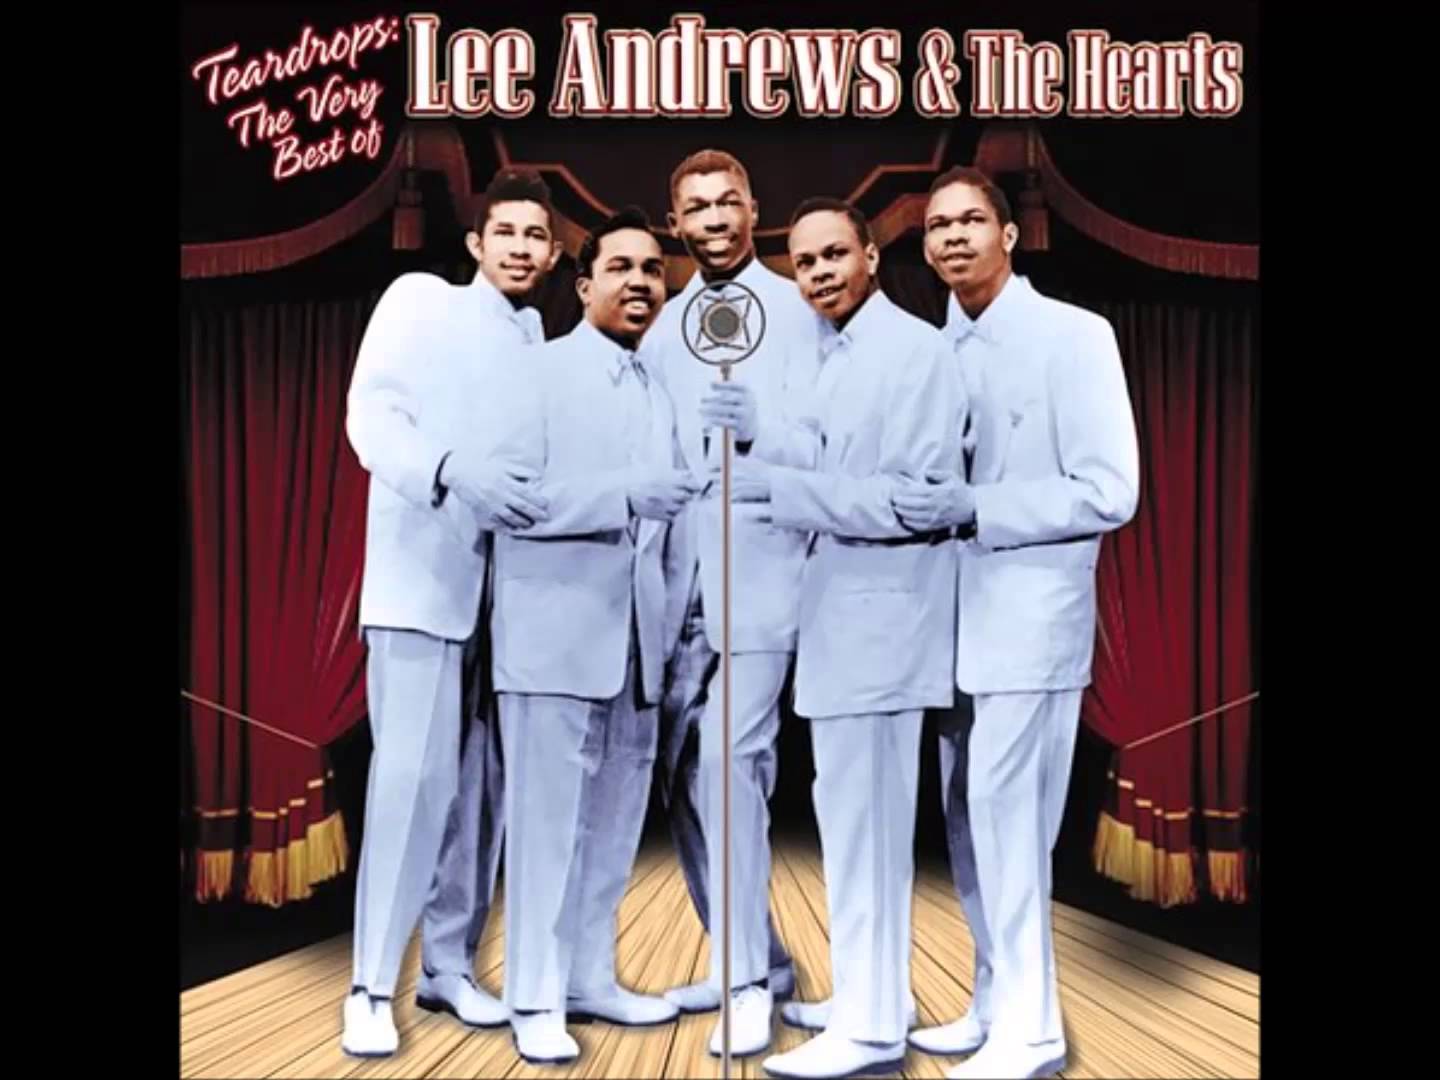 Lee Andrews & the Hearts